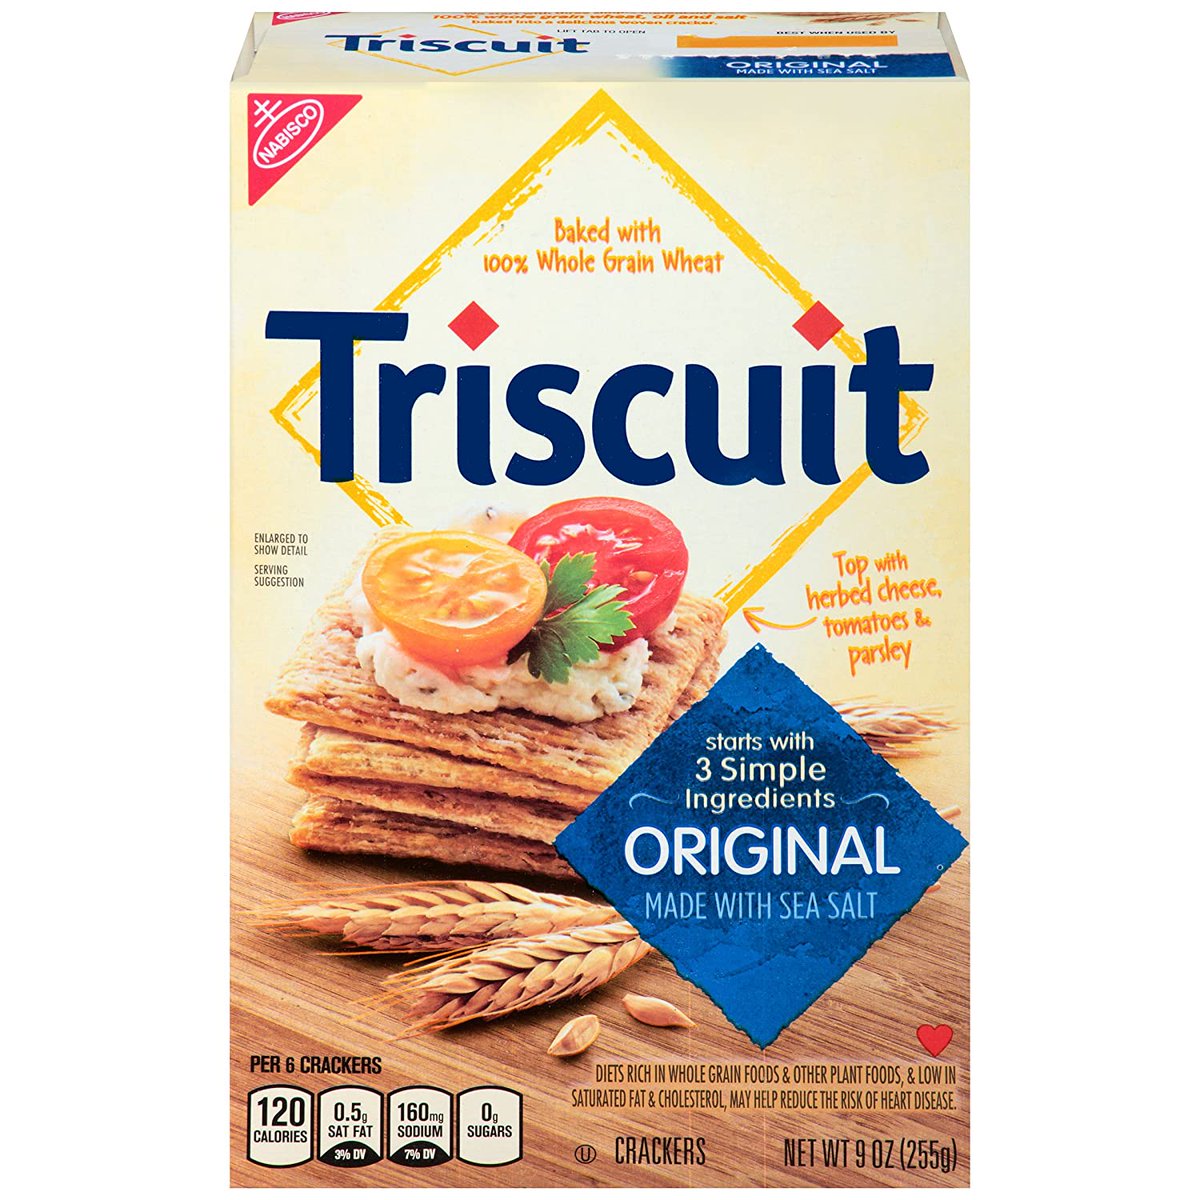 OK, buckle up. I wanna talk to you about Triscuit.